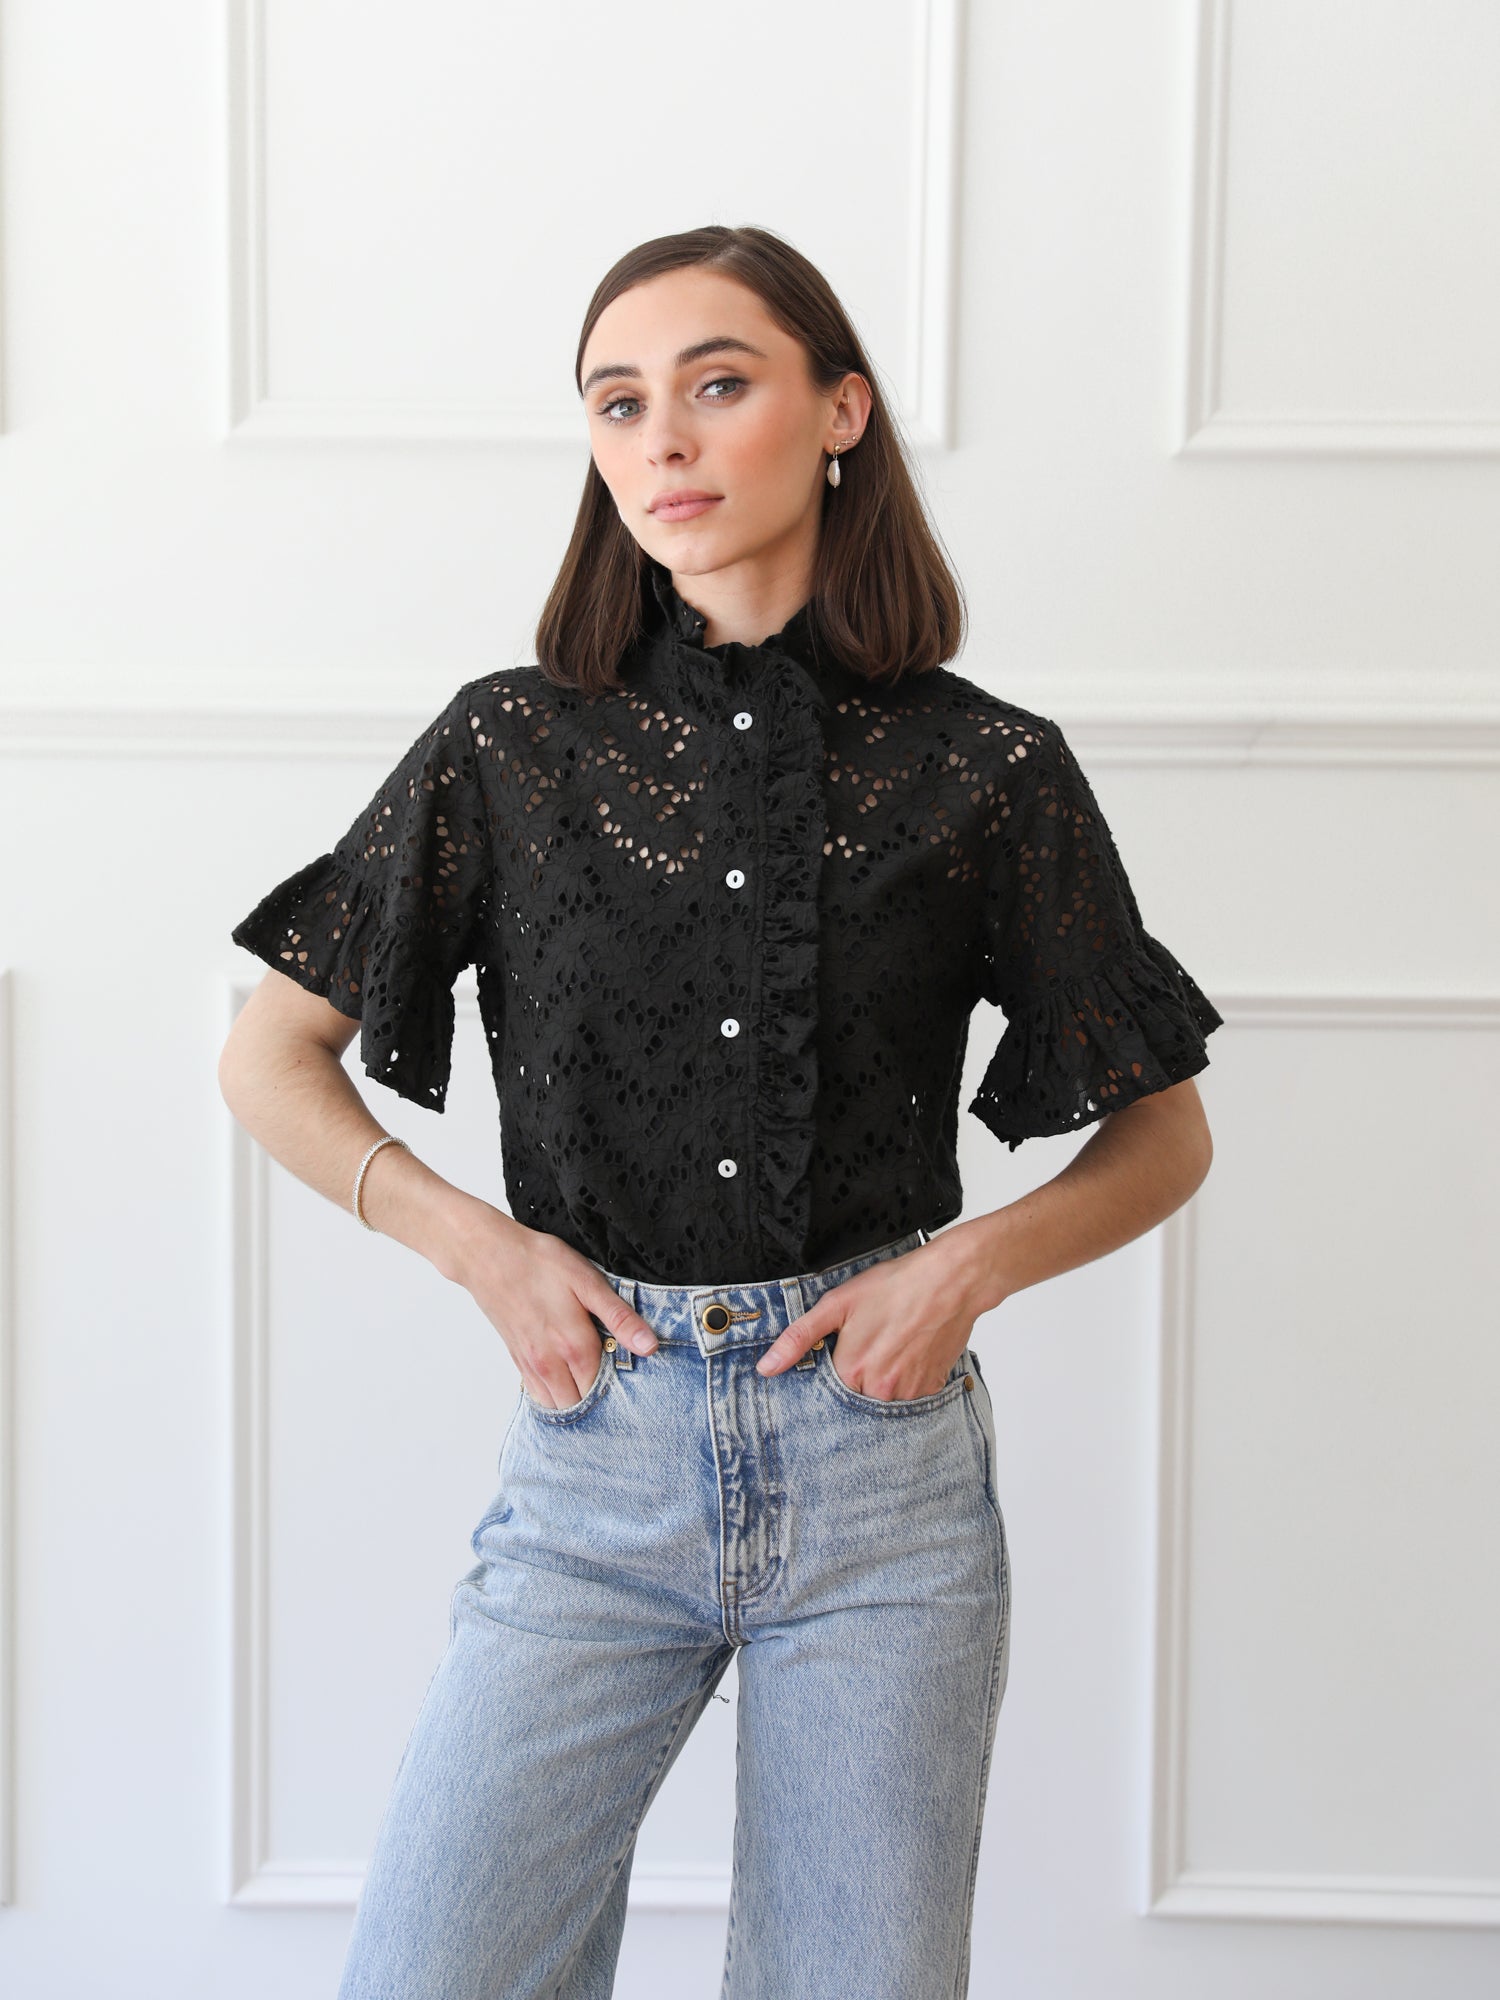 MILLE Clothing Vanessa Top in Black Floral Eyelet